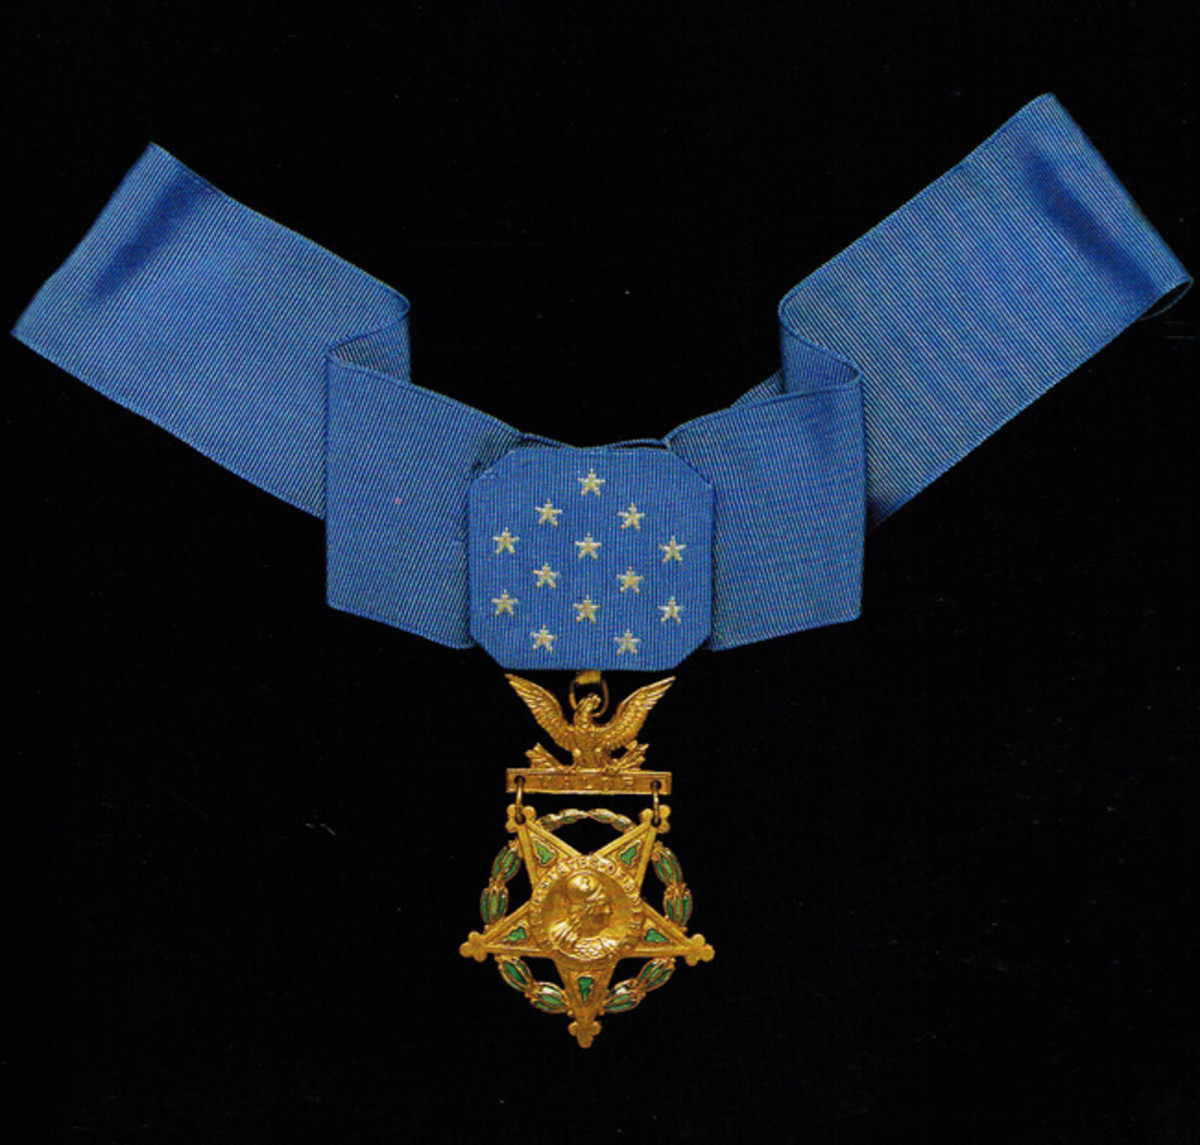 Army version of the Medal of Honor